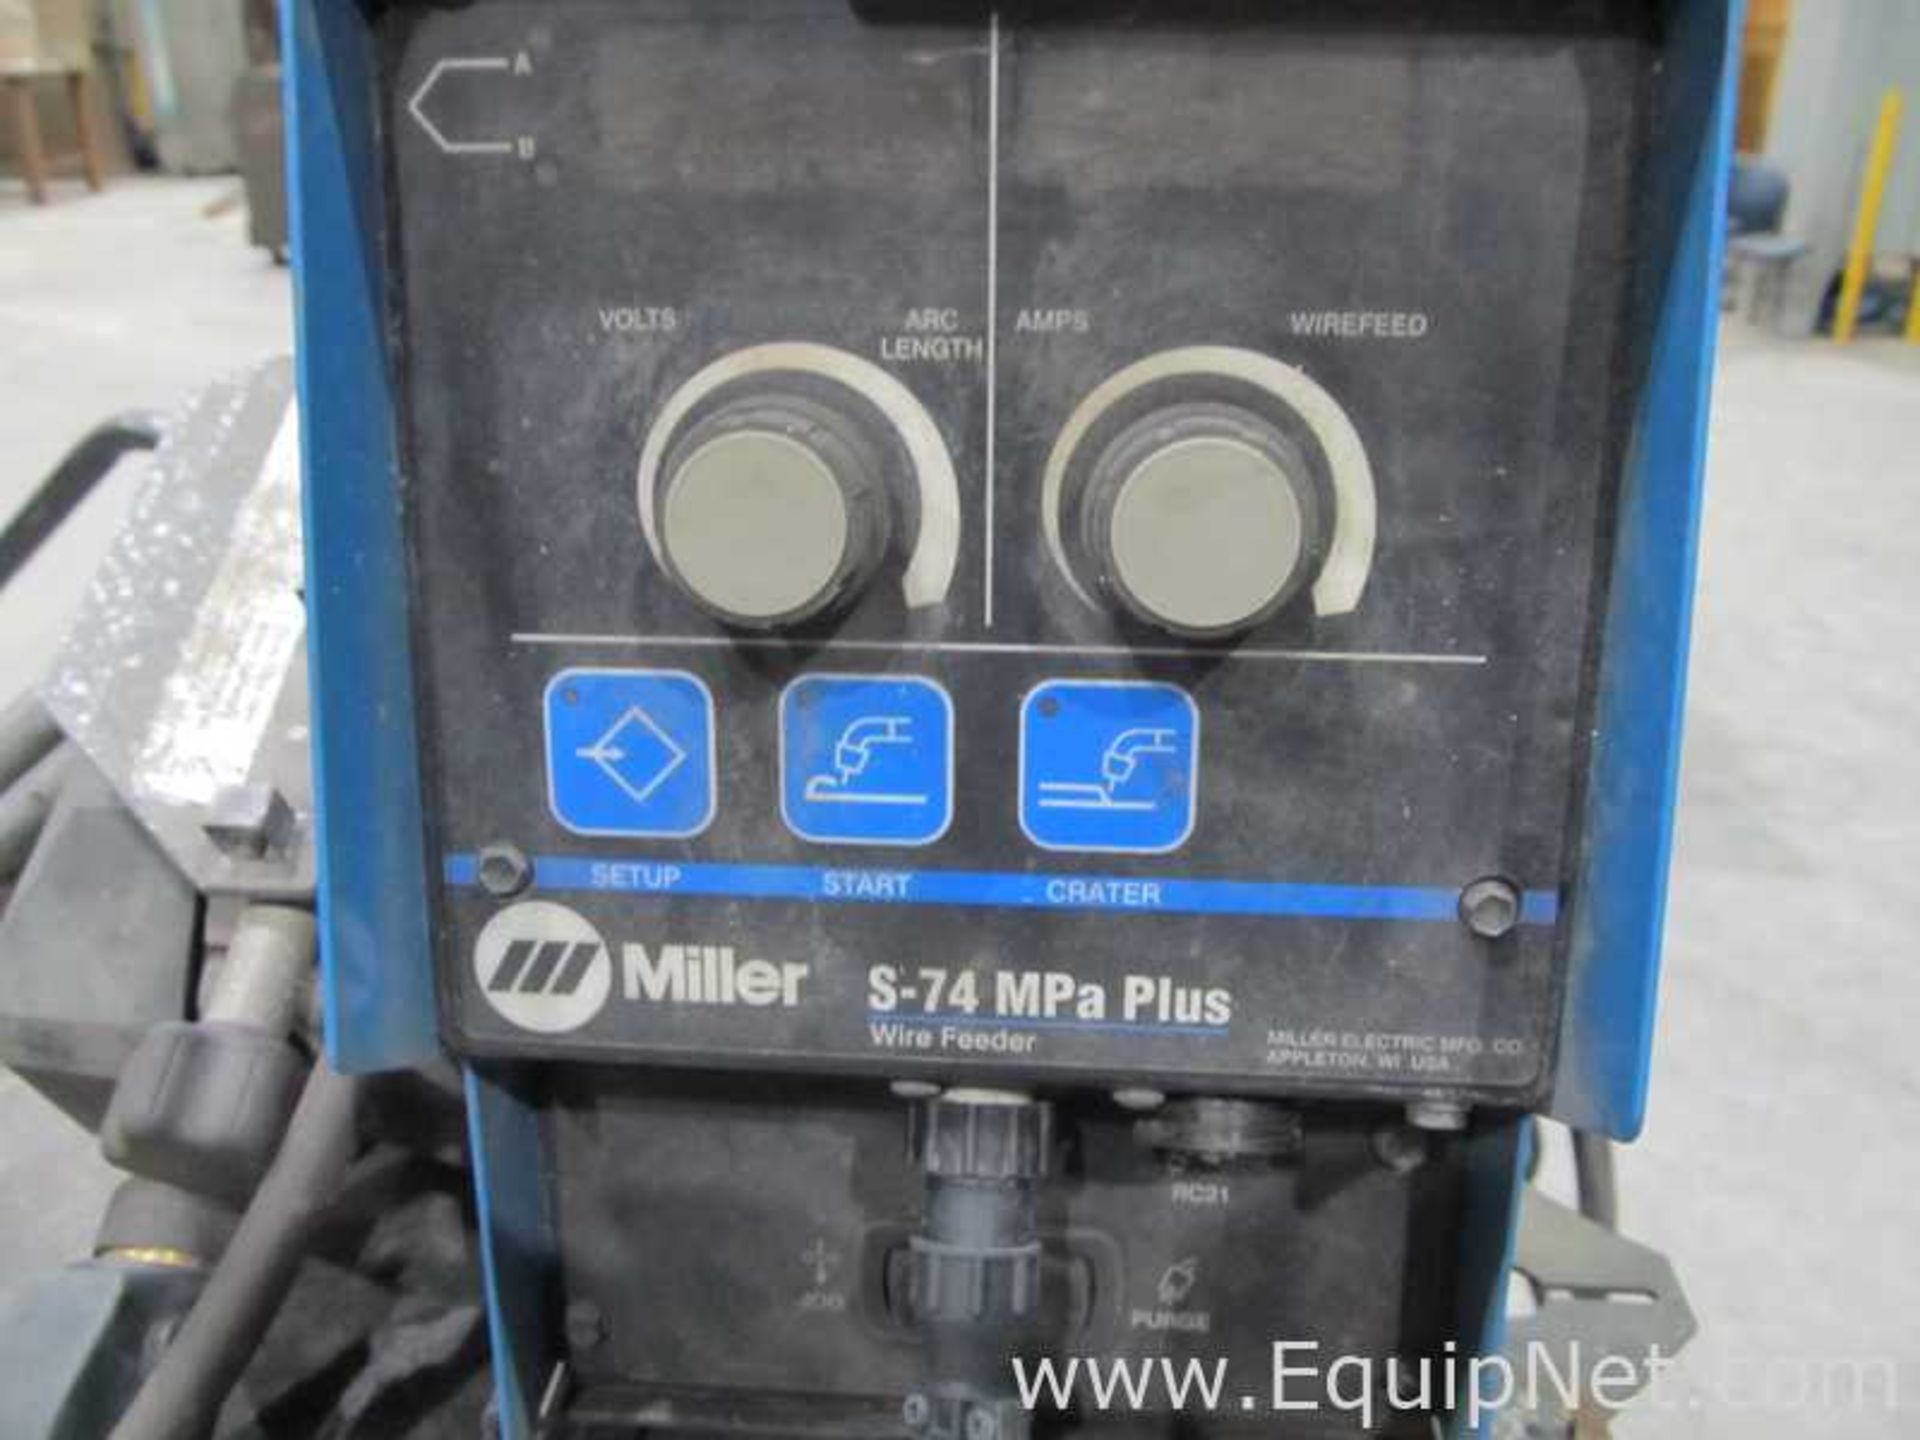 Miller XMT 450 CC/CV with S-74 MPa Plus Wire Feeder - Image 5 of 5